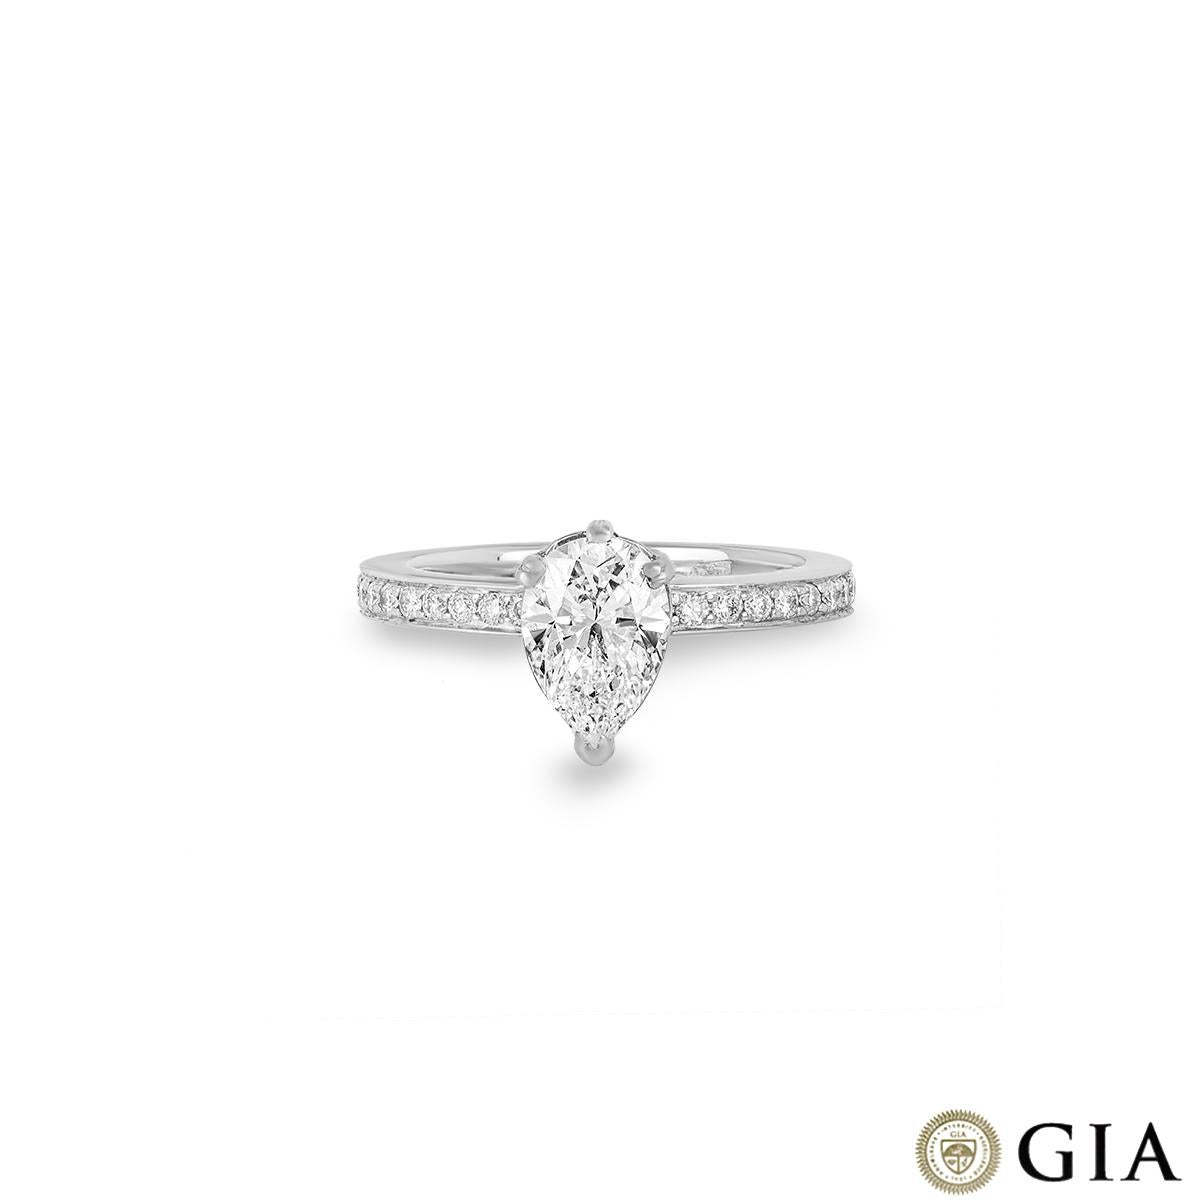 GIA Certified Pear Shape Diamond Engagement Ring 1.21 Carat G/VS1 For Sale 1